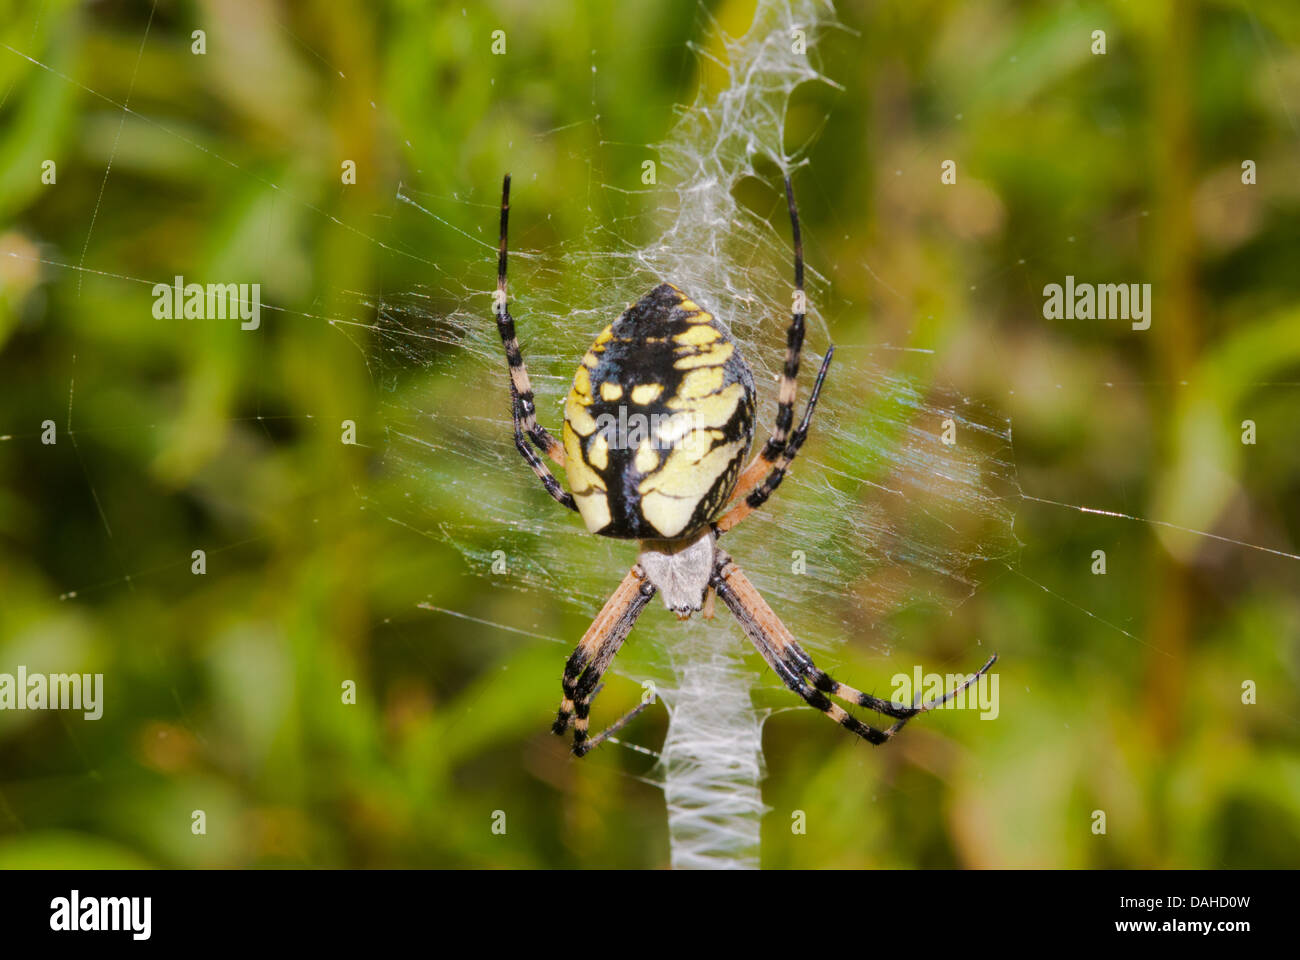 Black and yellow argiope spider sitting on its web, Little Cataraqui Conservation Area, Ontario Stock Photo